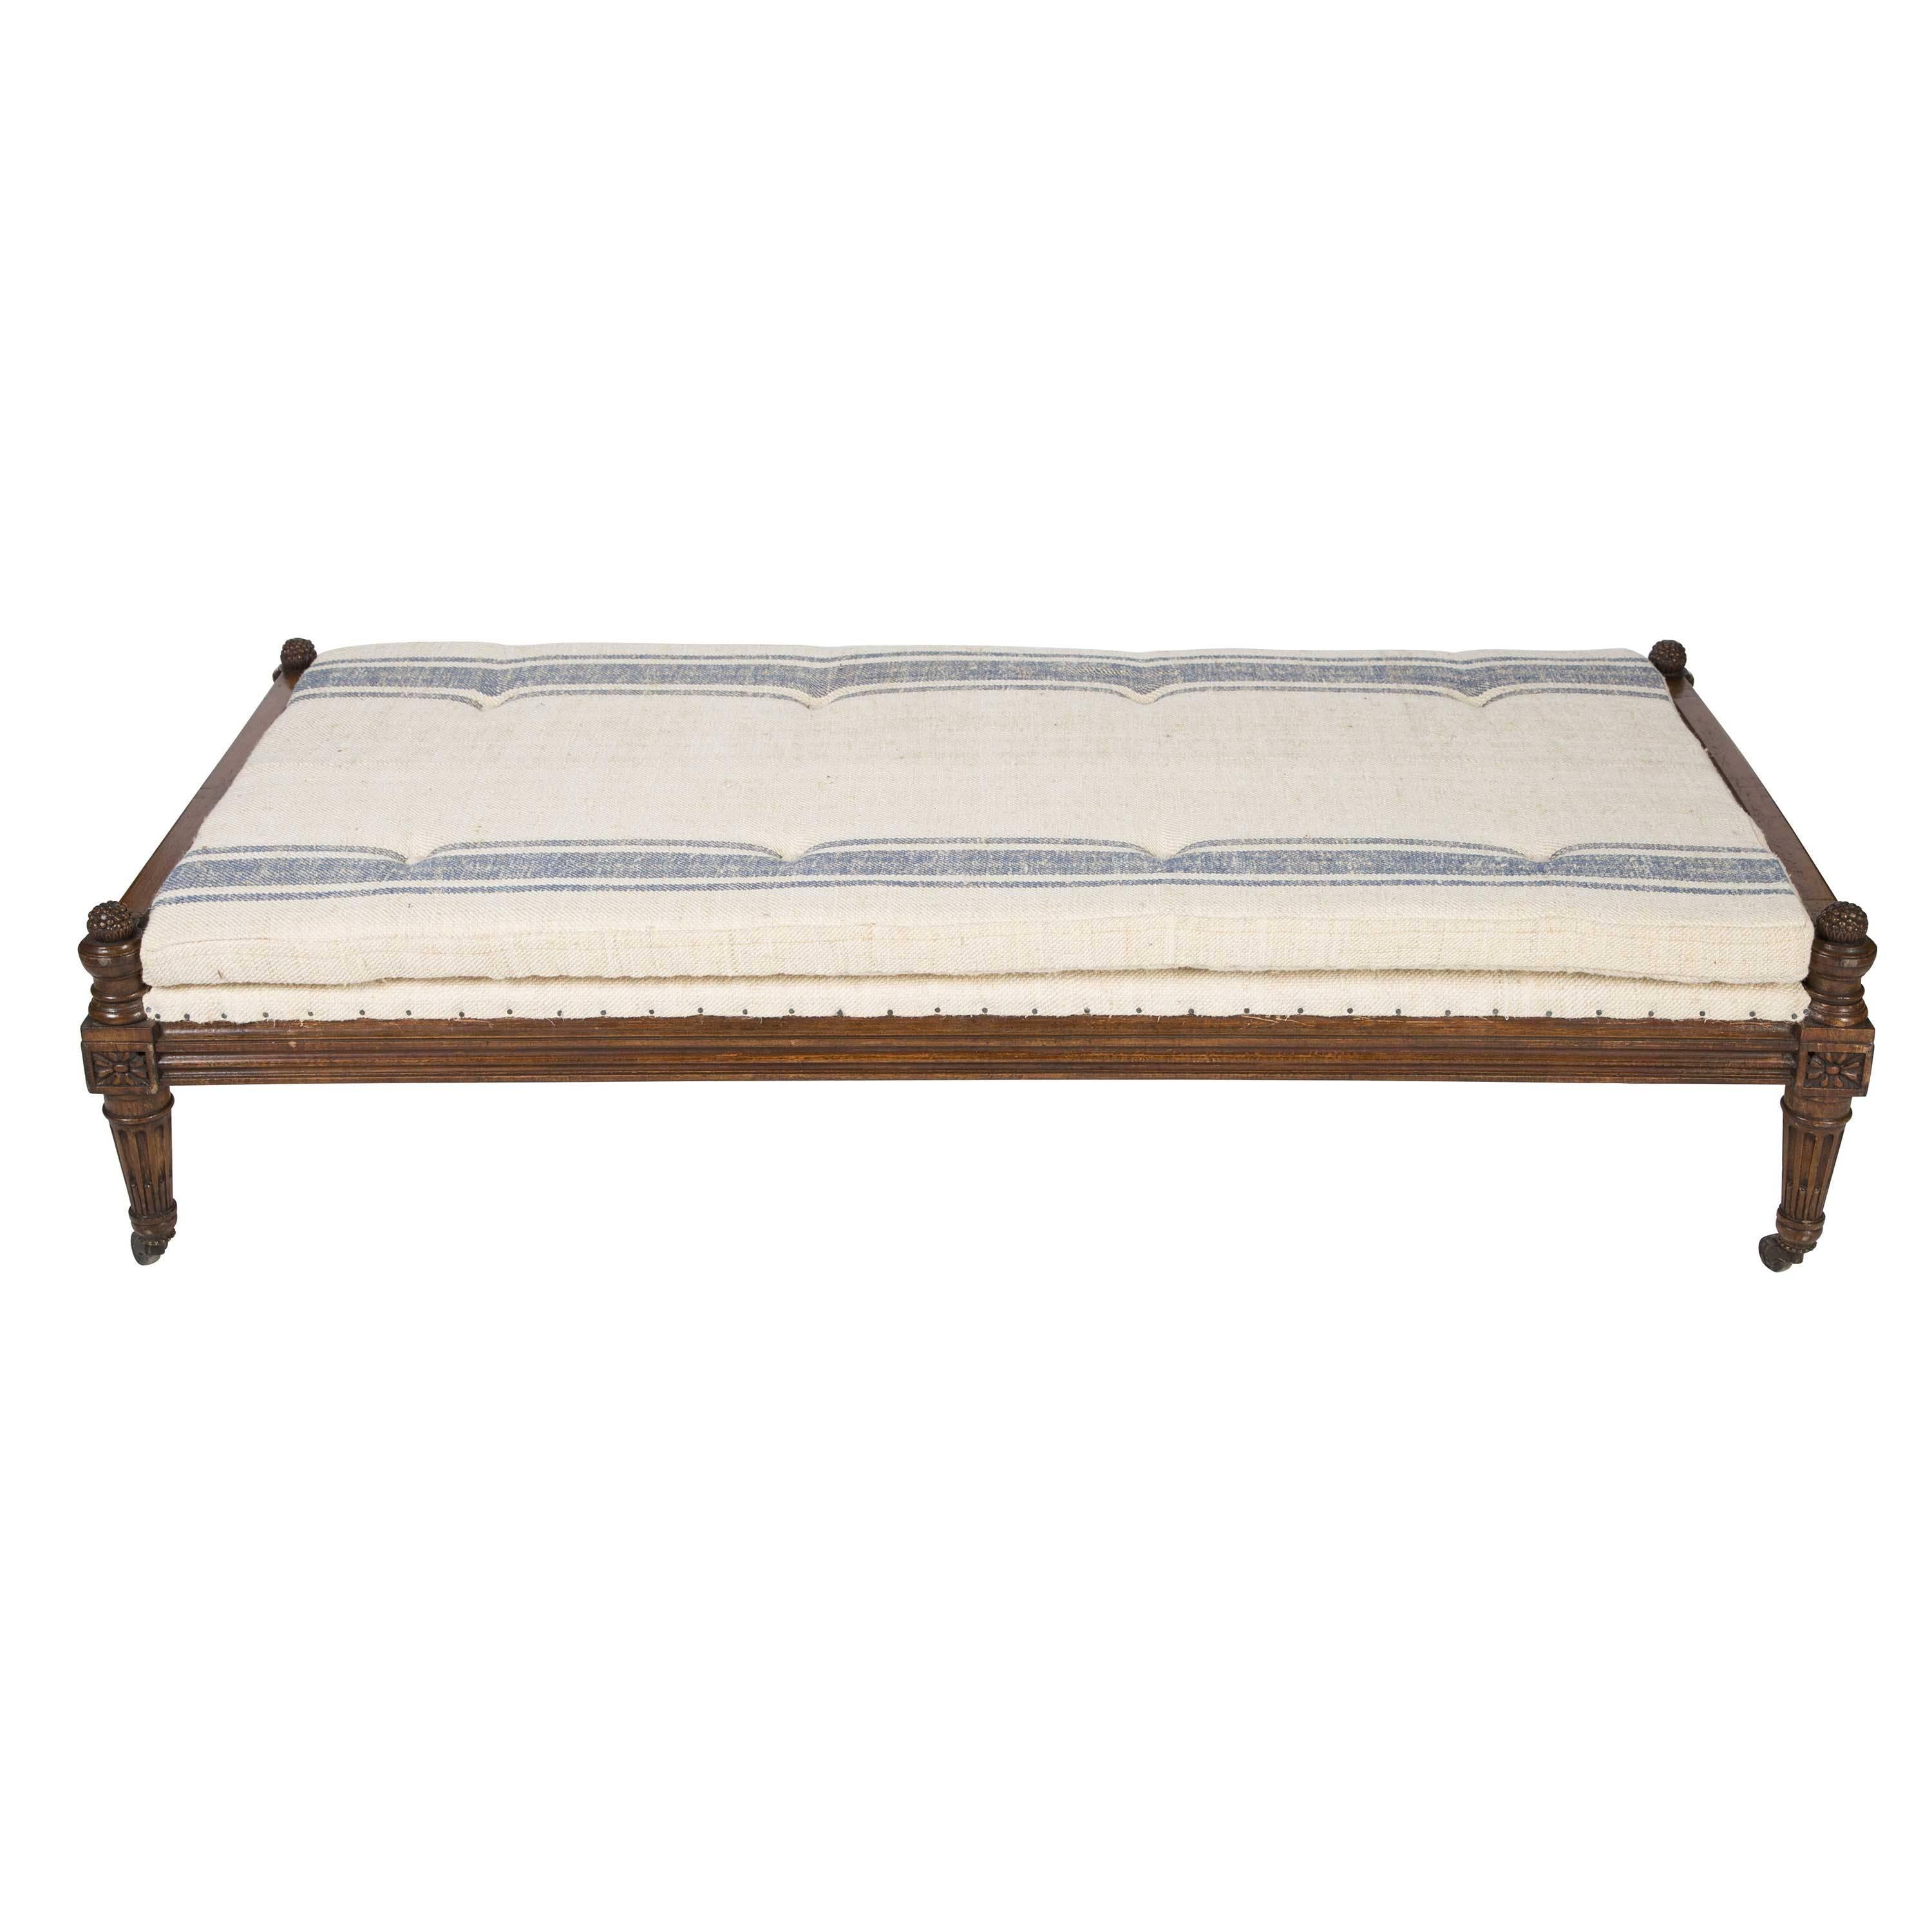 English Country House Footstool